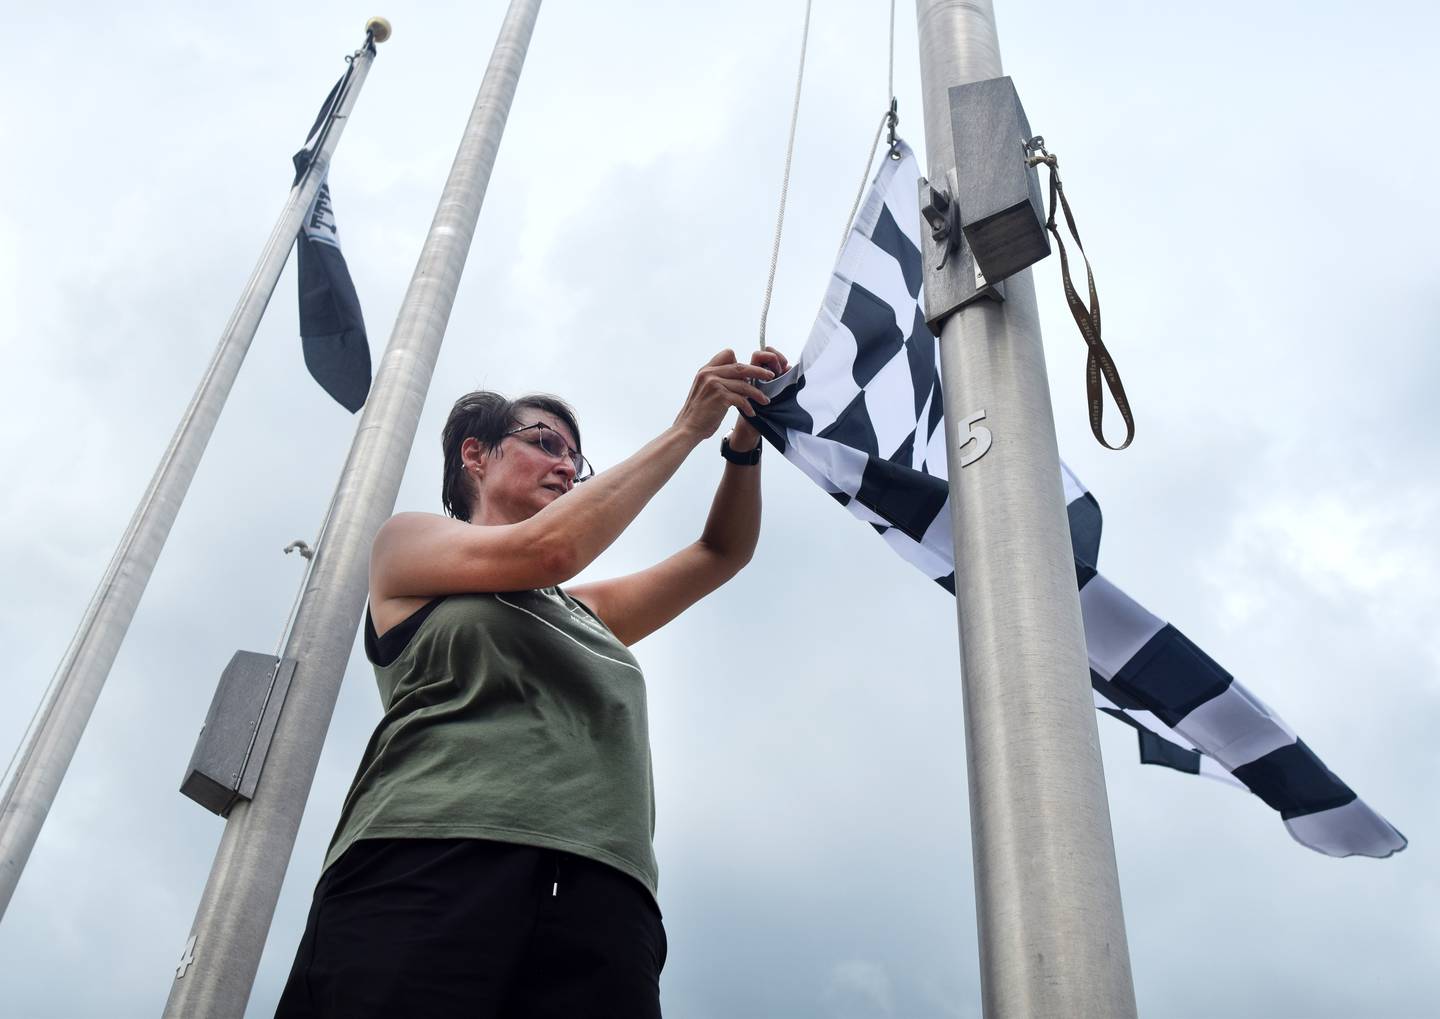 Erin Yeager, executive director of Newton Main Street, prepares to hoist a finish line flag to a post on June 25 in downtown Newton. She was joined by IndyCar representatives who helped place flags around the town square to commemorate the upcoming race weekend at Iowa Speedway.